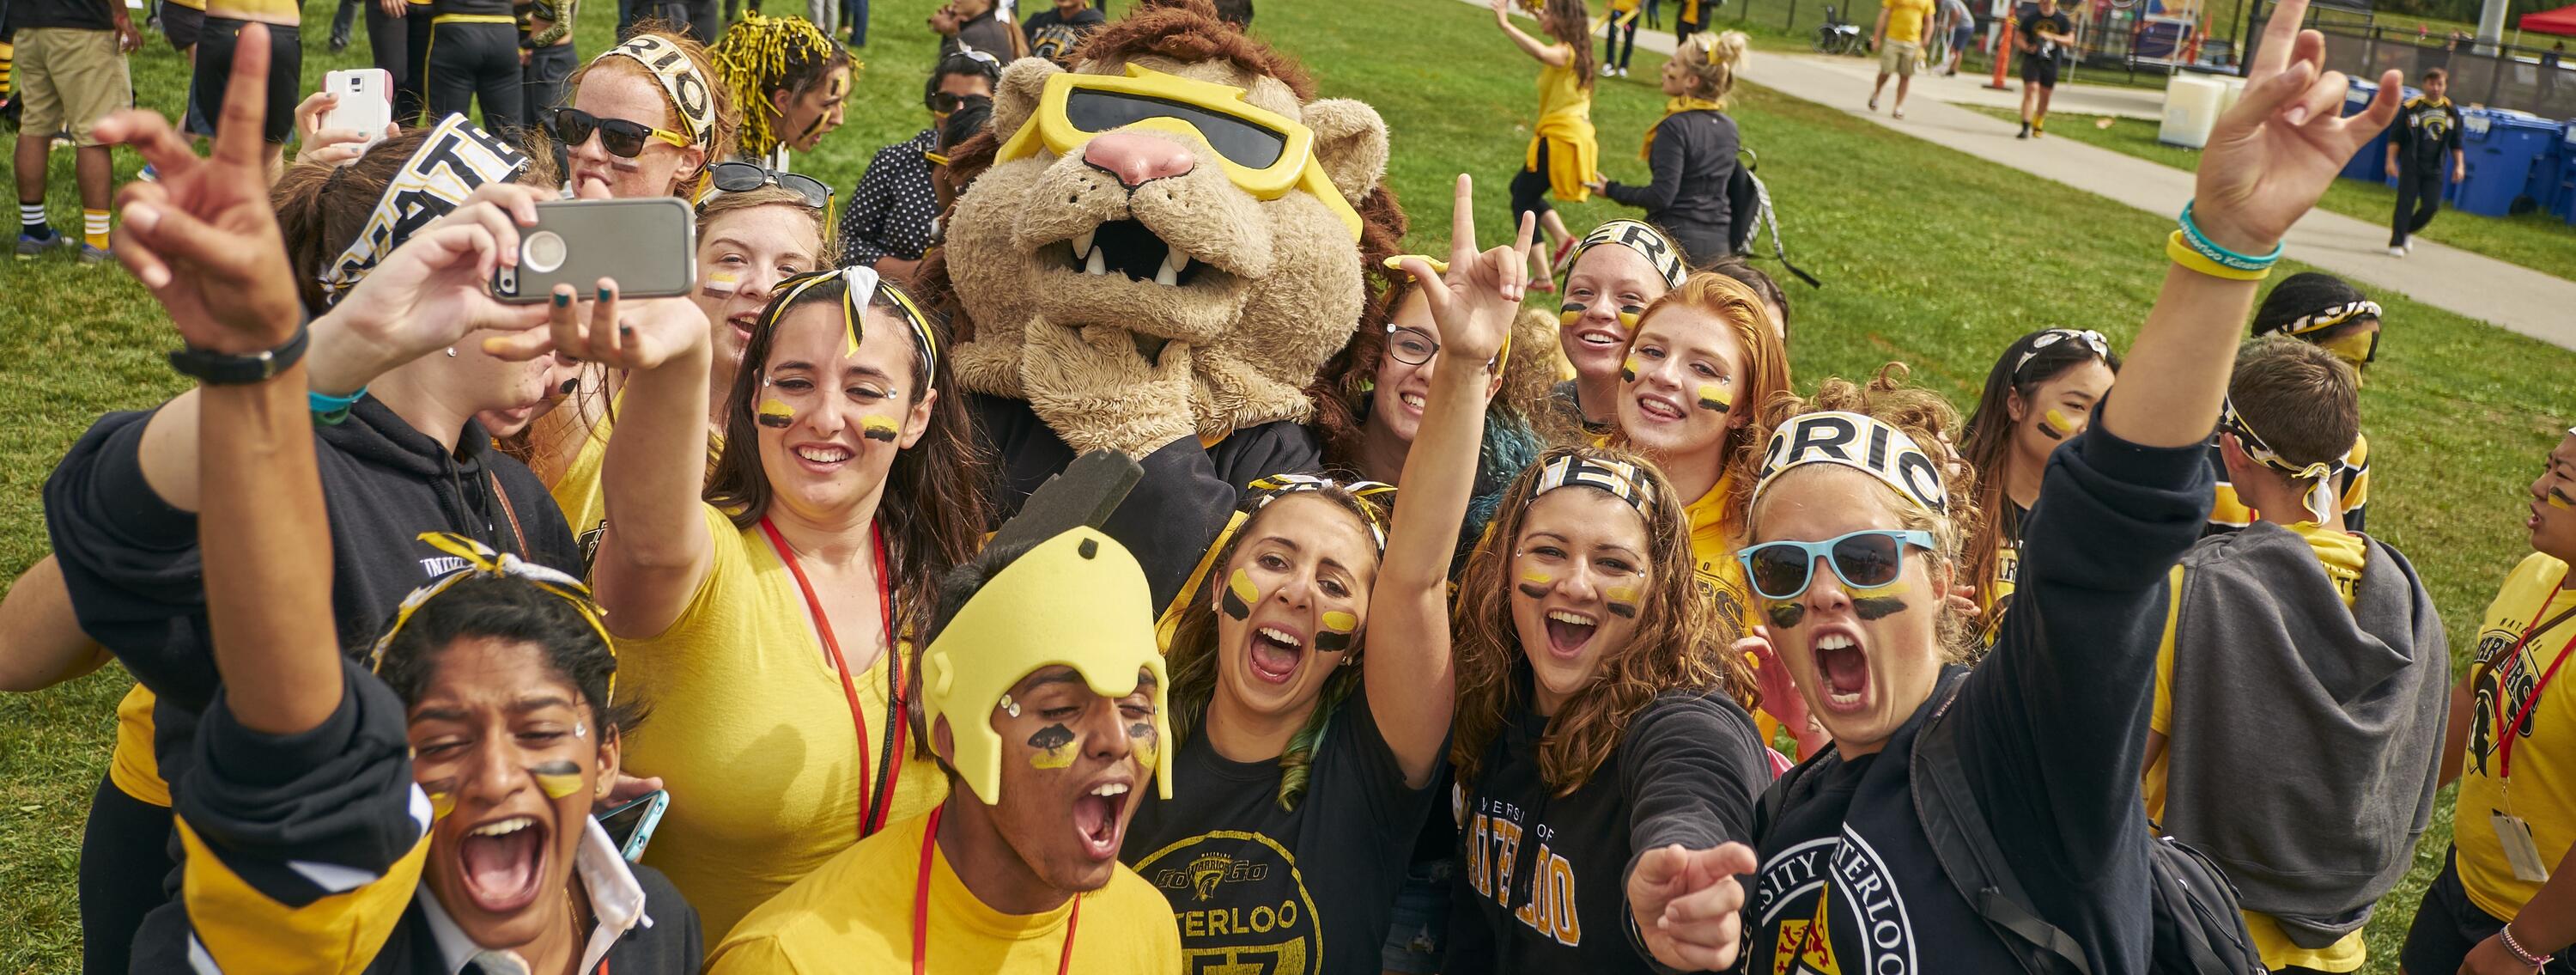 Students wearing black and gold clothing and makeup with university lion mascot